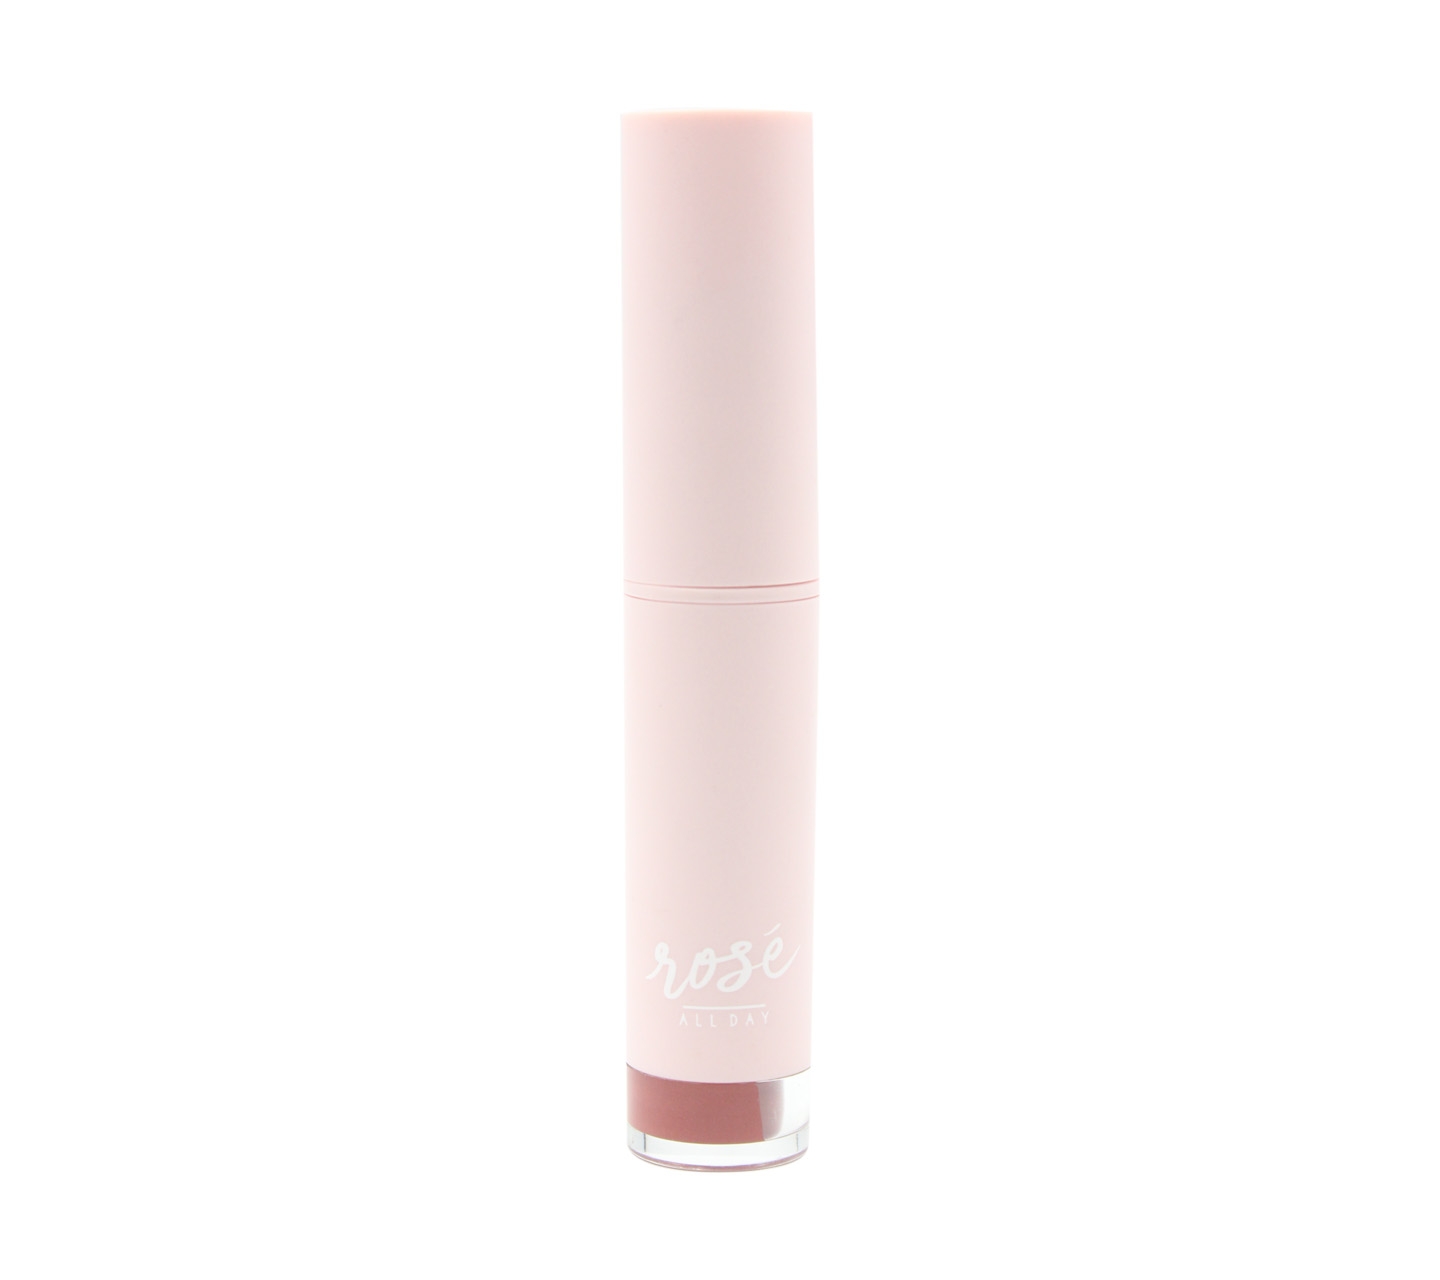 Rose All Day Lip And Cheek Pop Lipstick